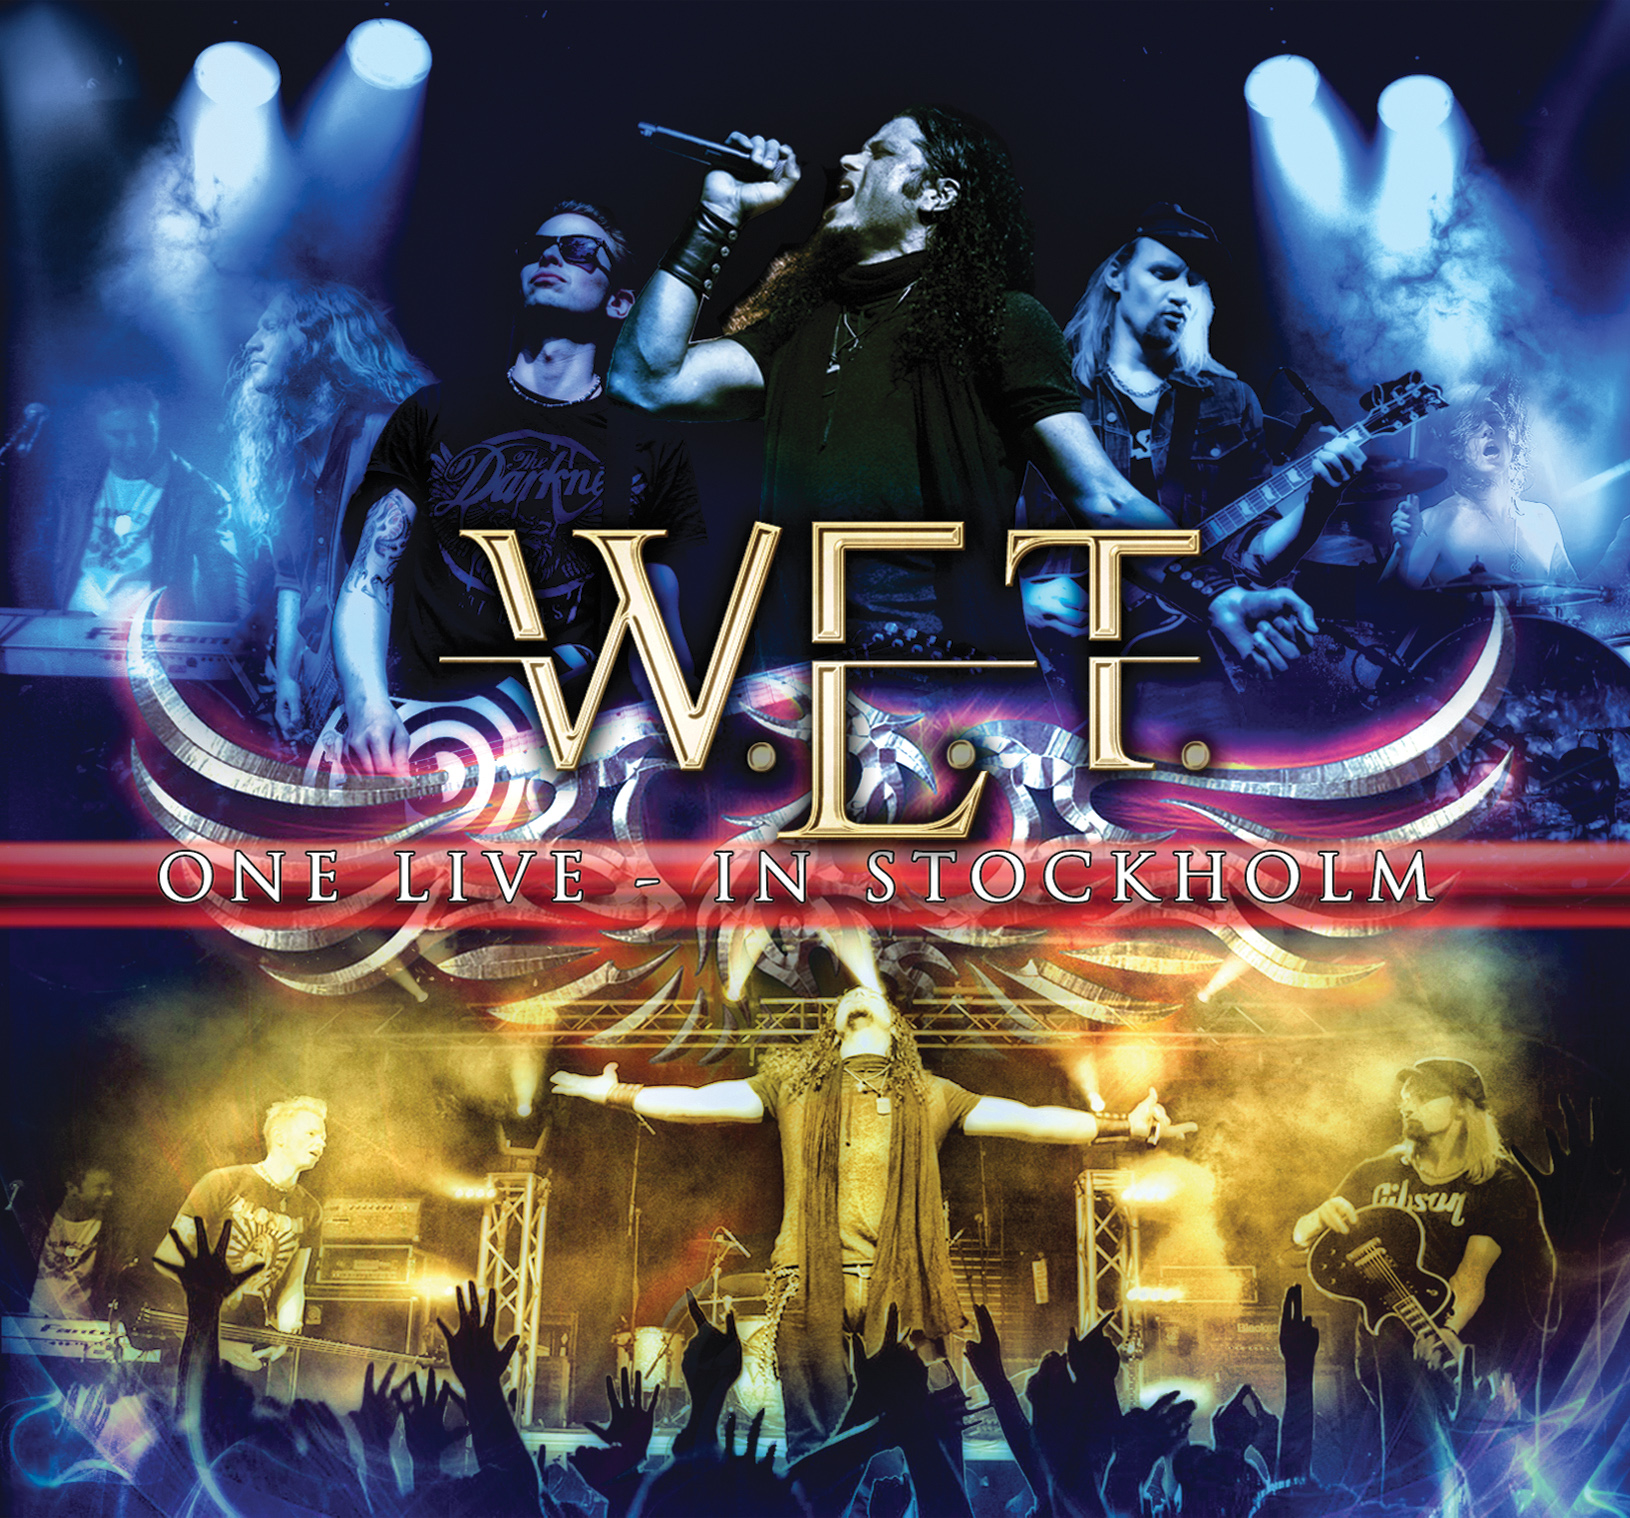 W.E.T. - One Live - In Stockholm